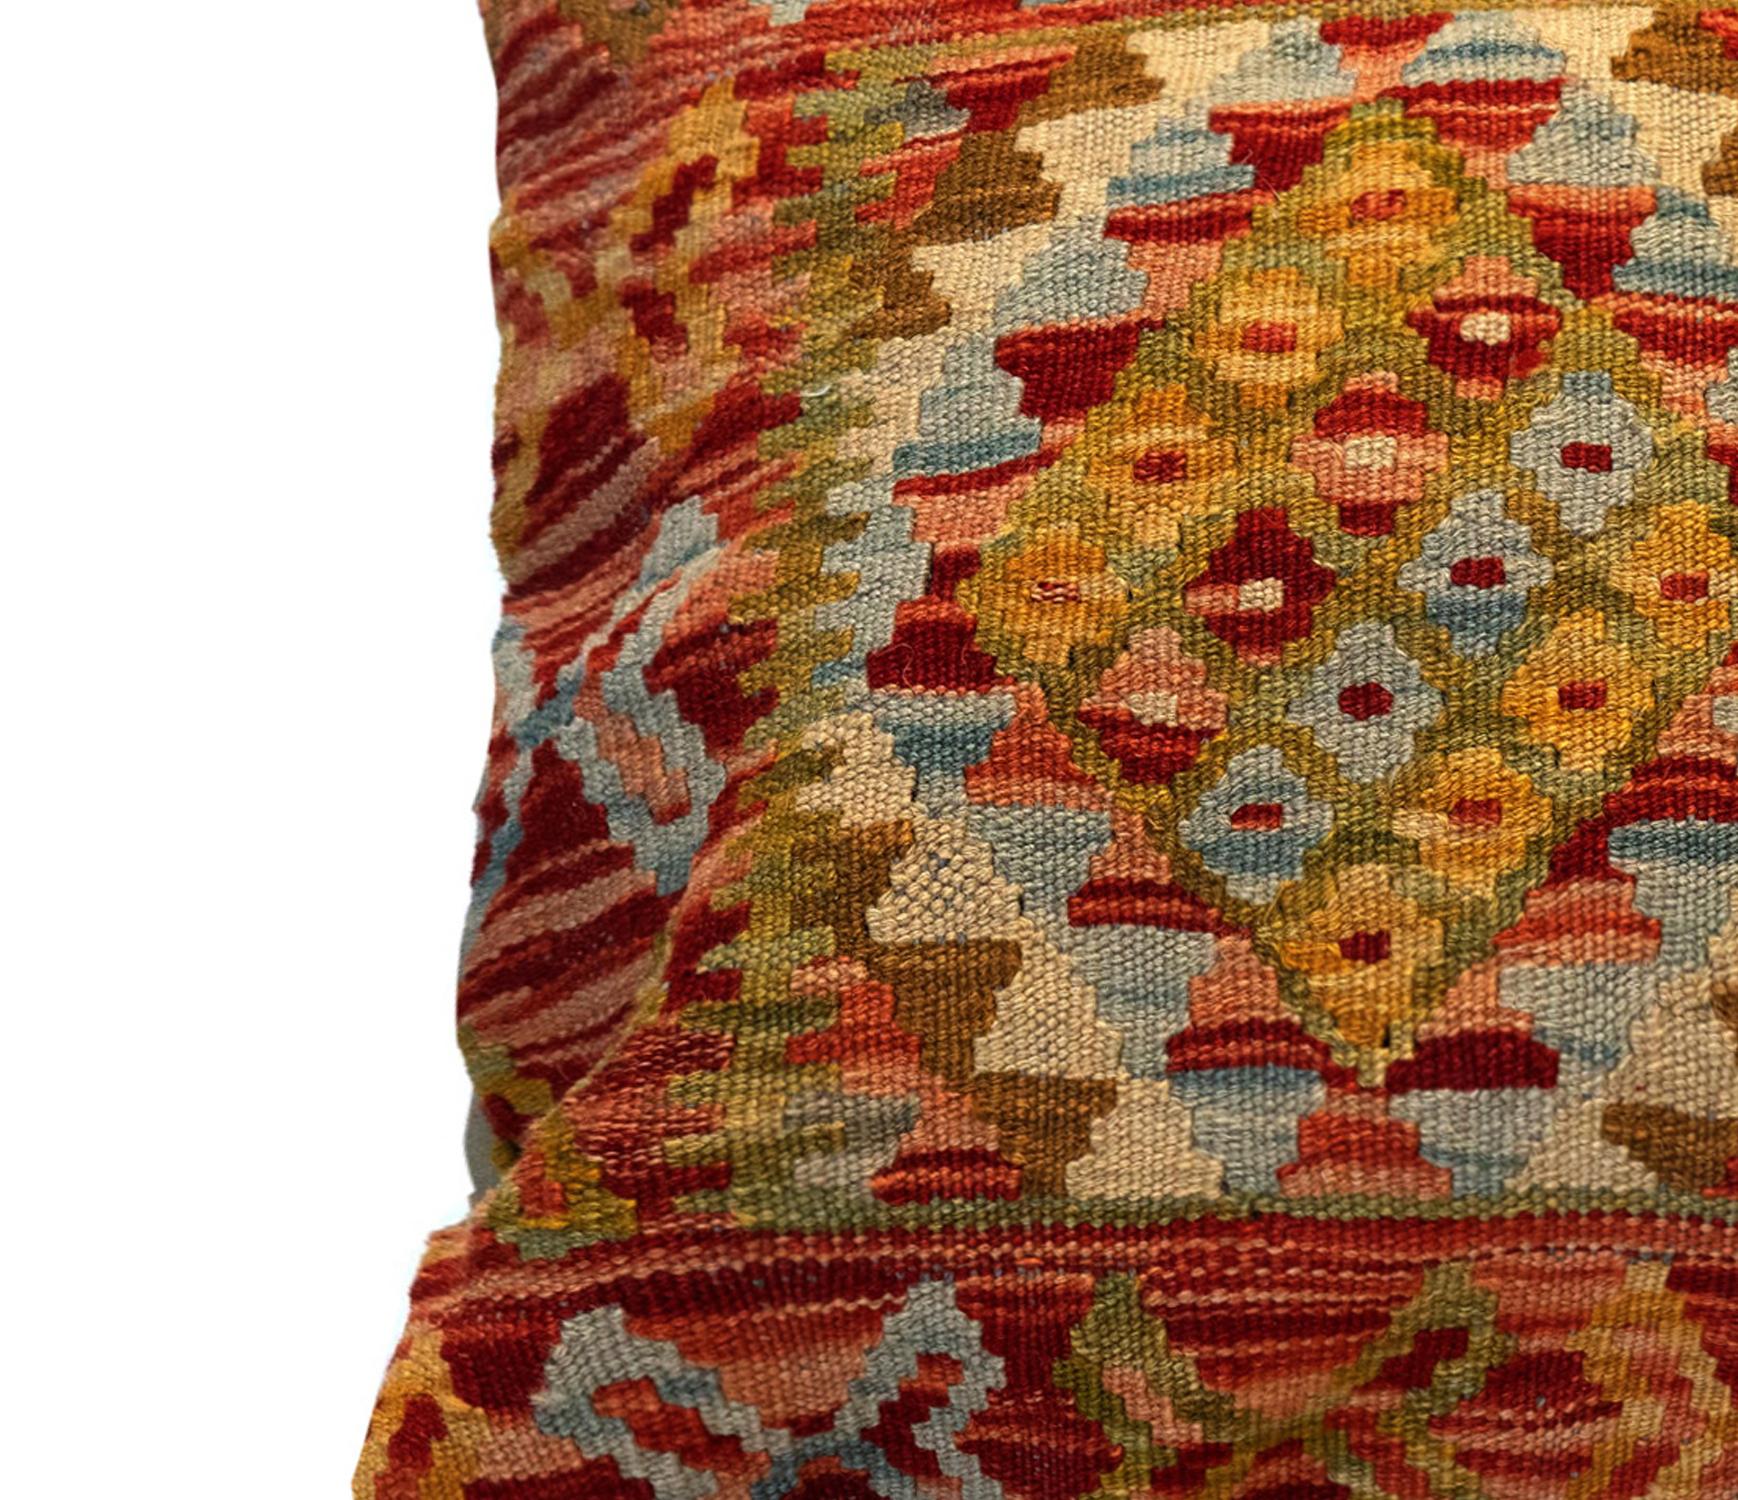 This unique geometric cushion cover is a handwoven kilim cushion cover woven in Afghanistan in the late 20th century/ early 21st century. Woven with the traditional Flat Woven kilim technique with a bold geometric design. Featuring a rustic colour